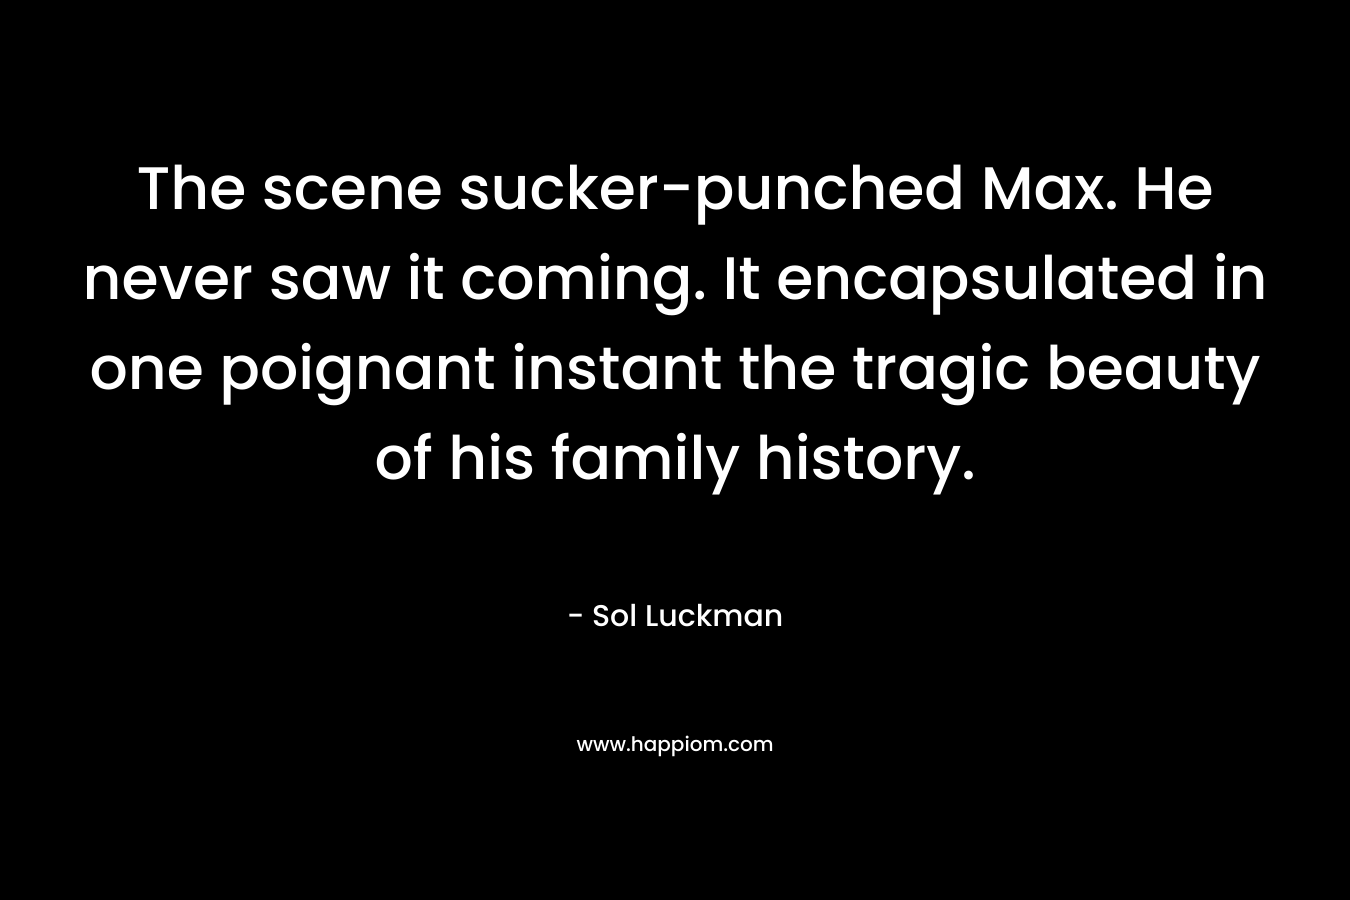 The scene sucker-punched Max. He never saw it coming. It encapsulated in one poignant instant the tragic beauty of his family history.